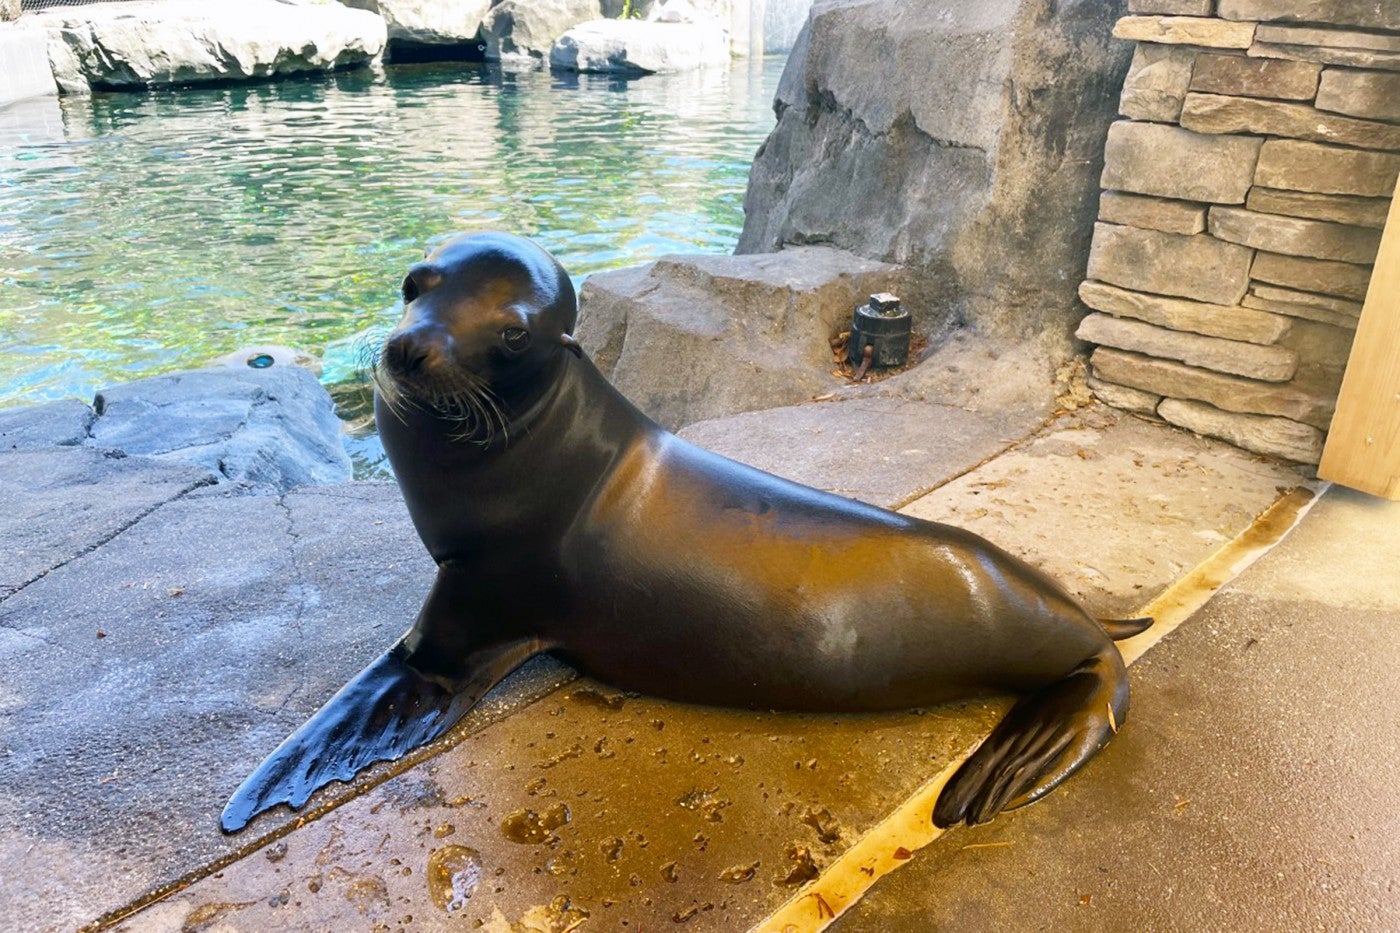 Sea lion Ronin heads toward the pool at the American Trail exhibit